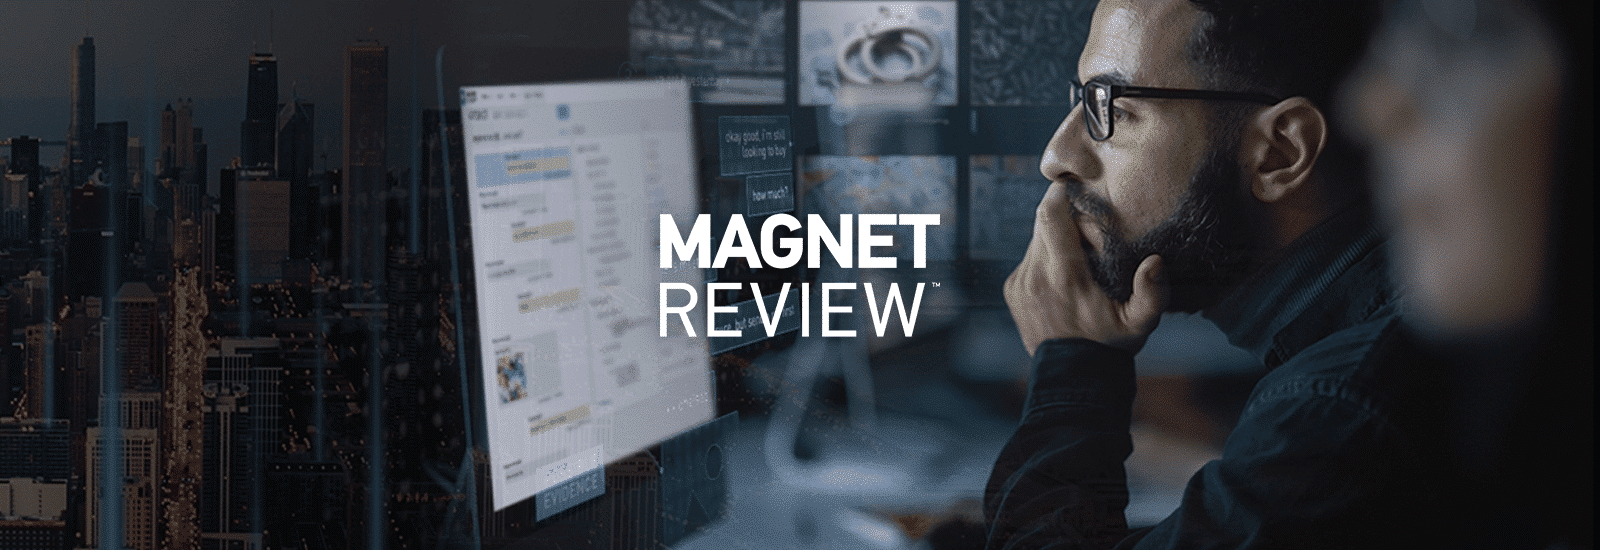 A decorative header for the Magnet REVIEW 4.2 release